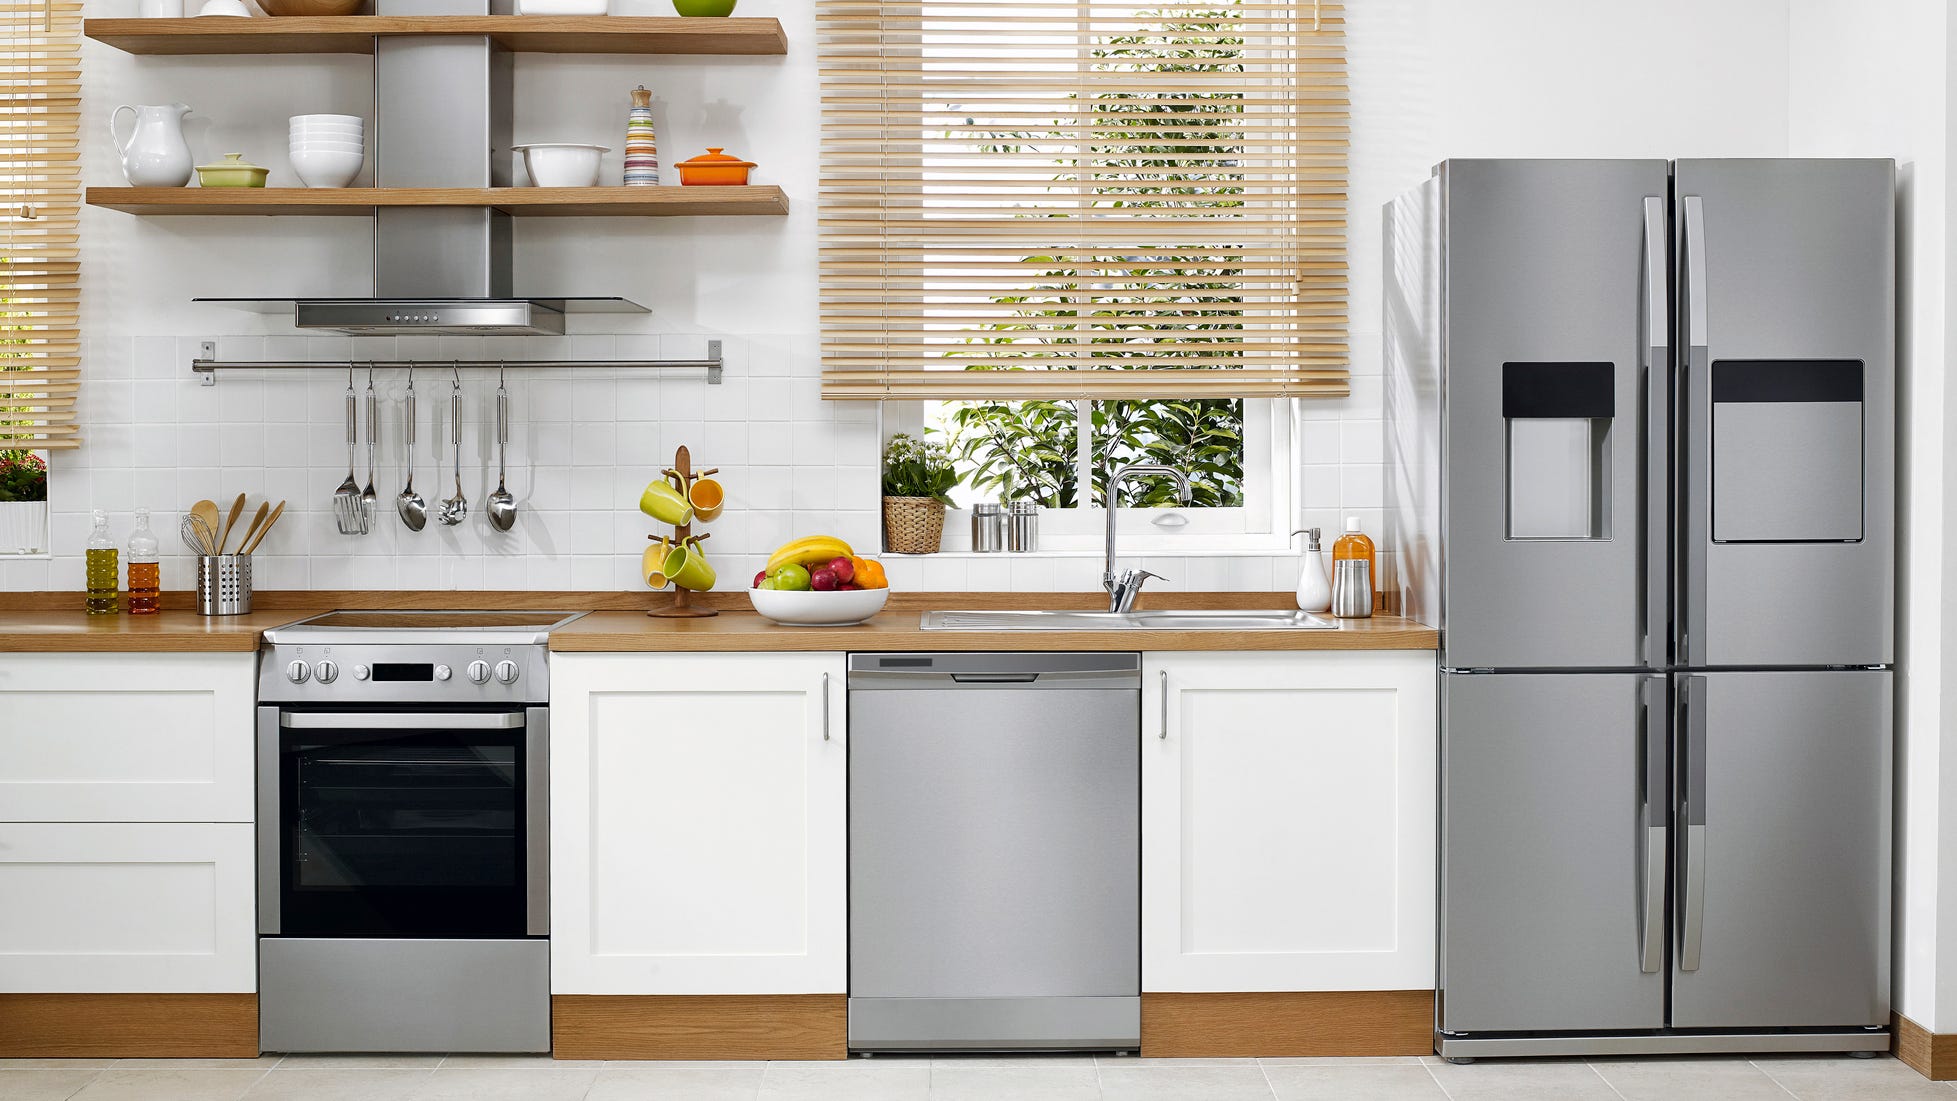 buying-a-new-appliance-7-things-you-need-to-know-ahead-of-time